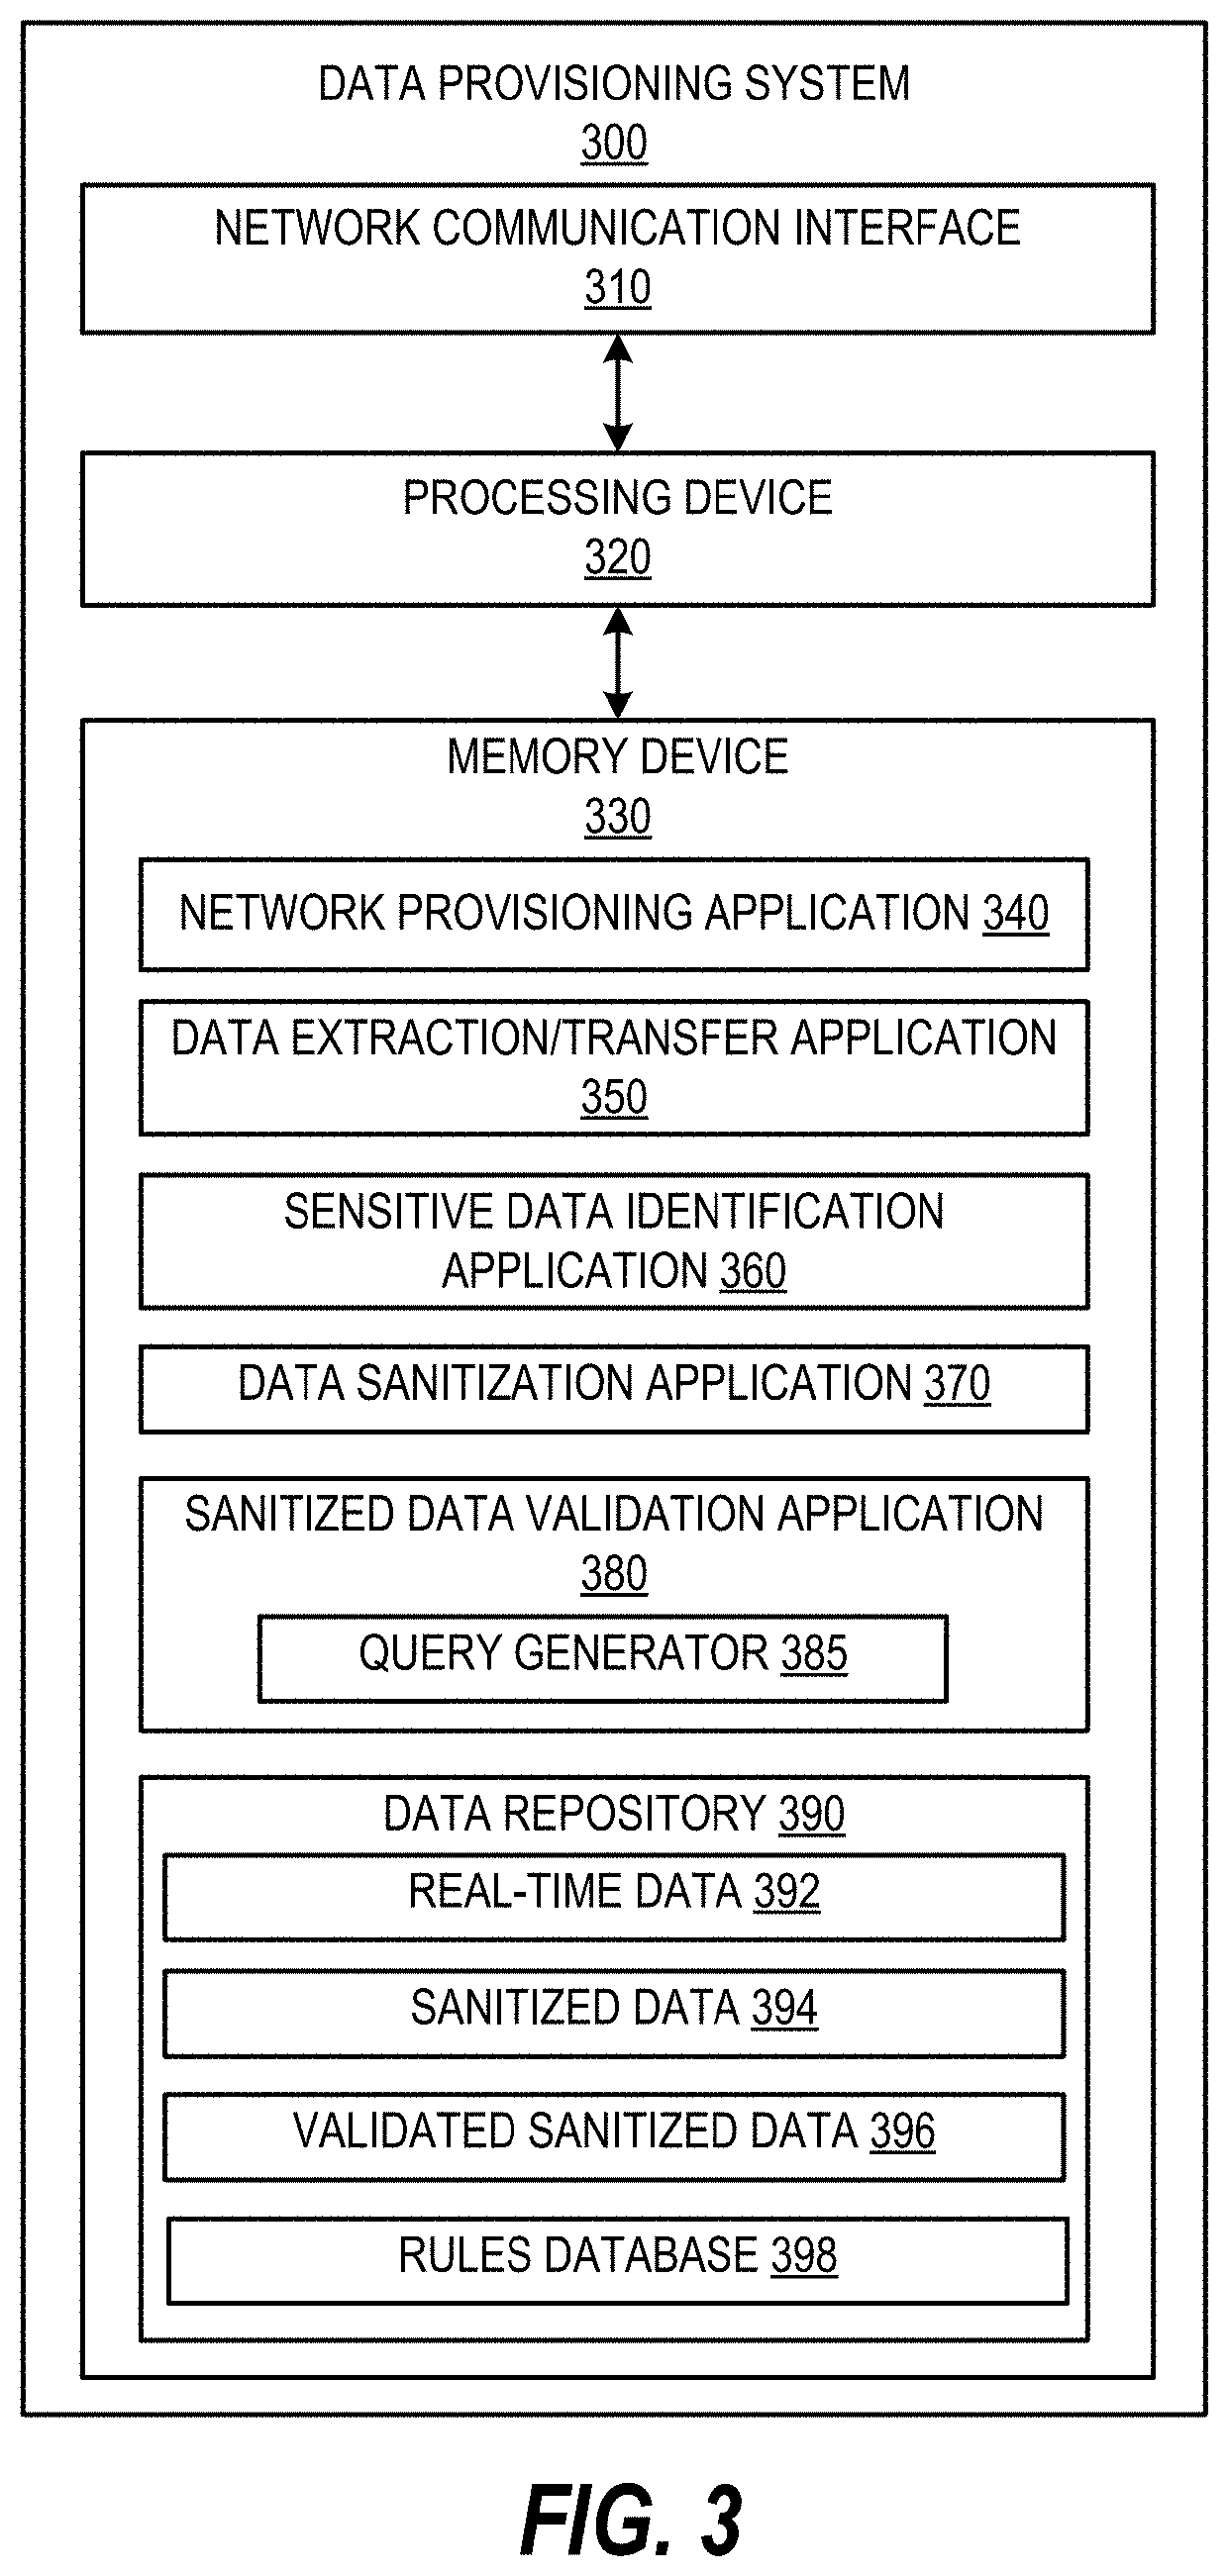 System for provisioning validated sanitized data for application development